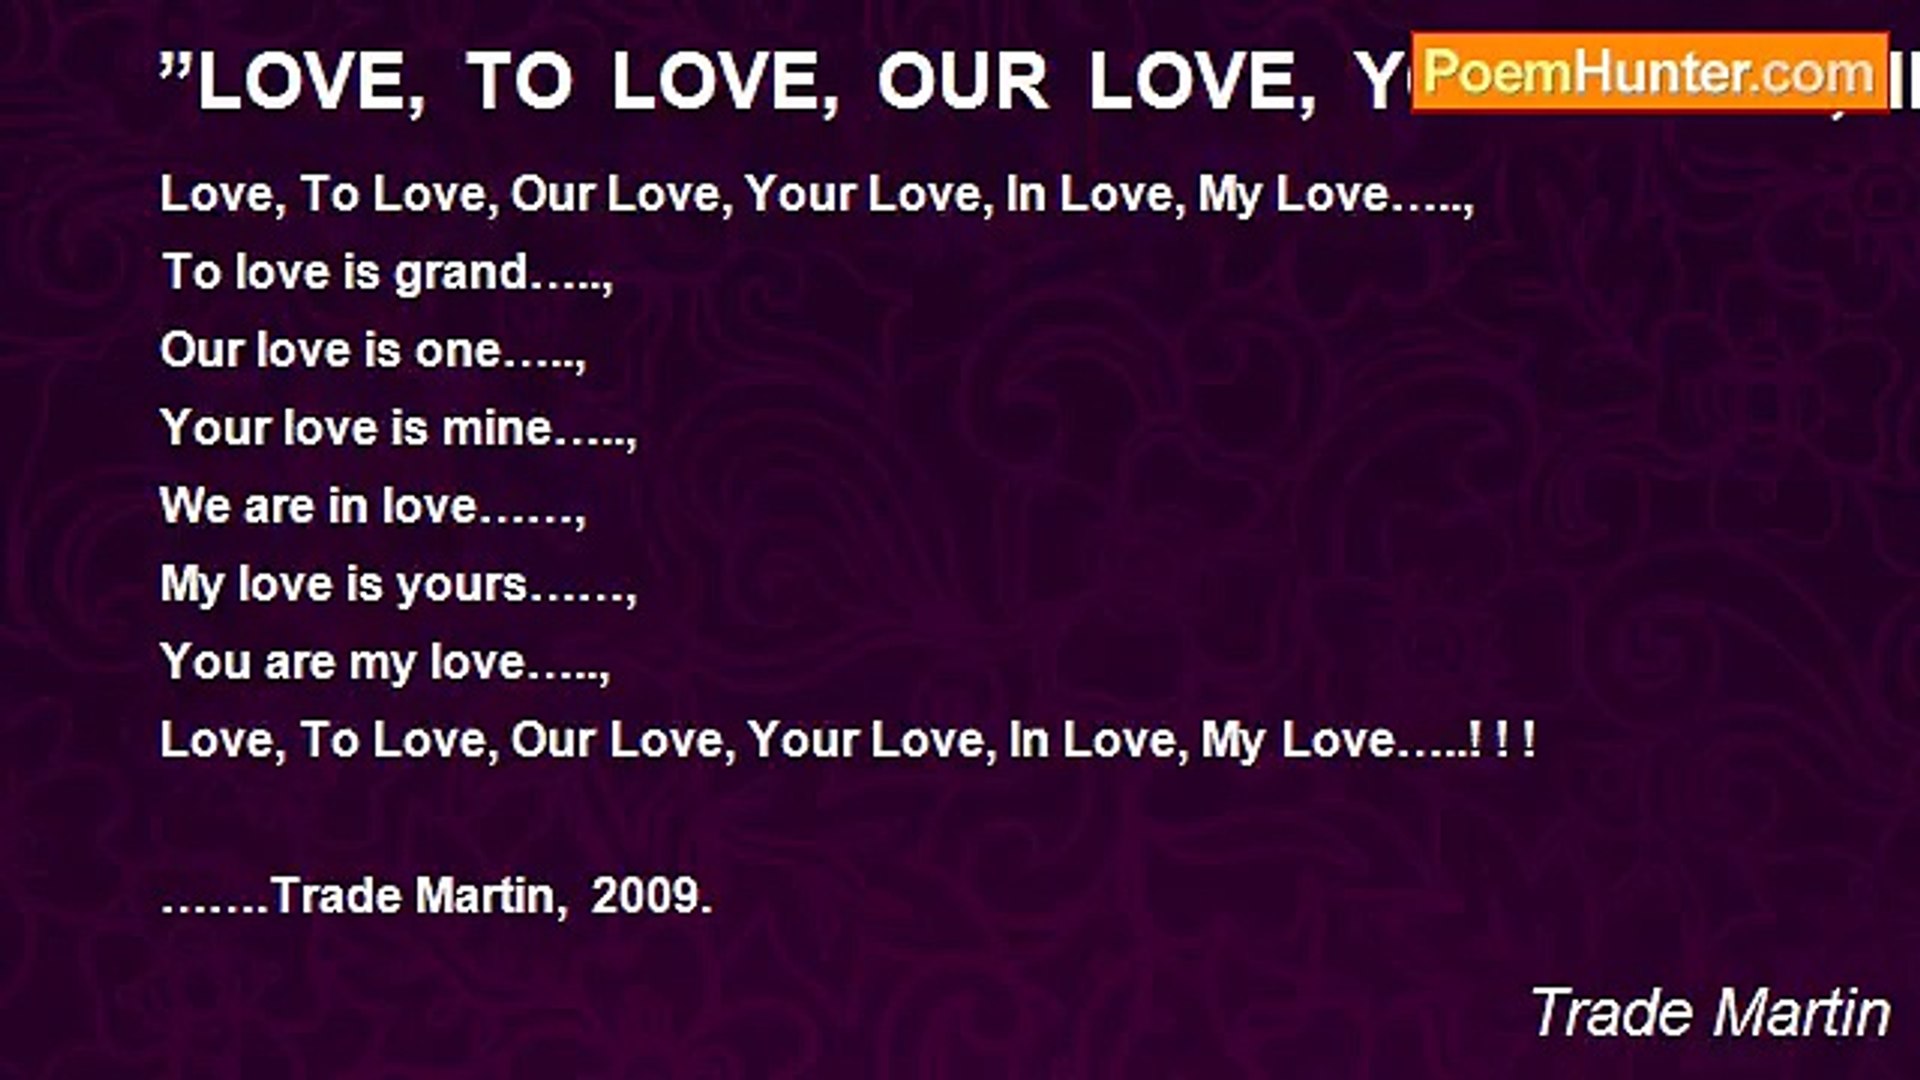 ⁣Trade Martin -   ”LOVE, TO LOVE, OUR LOVE, YOUR LOVE, IN LOVE, MY LOVE” ****************************